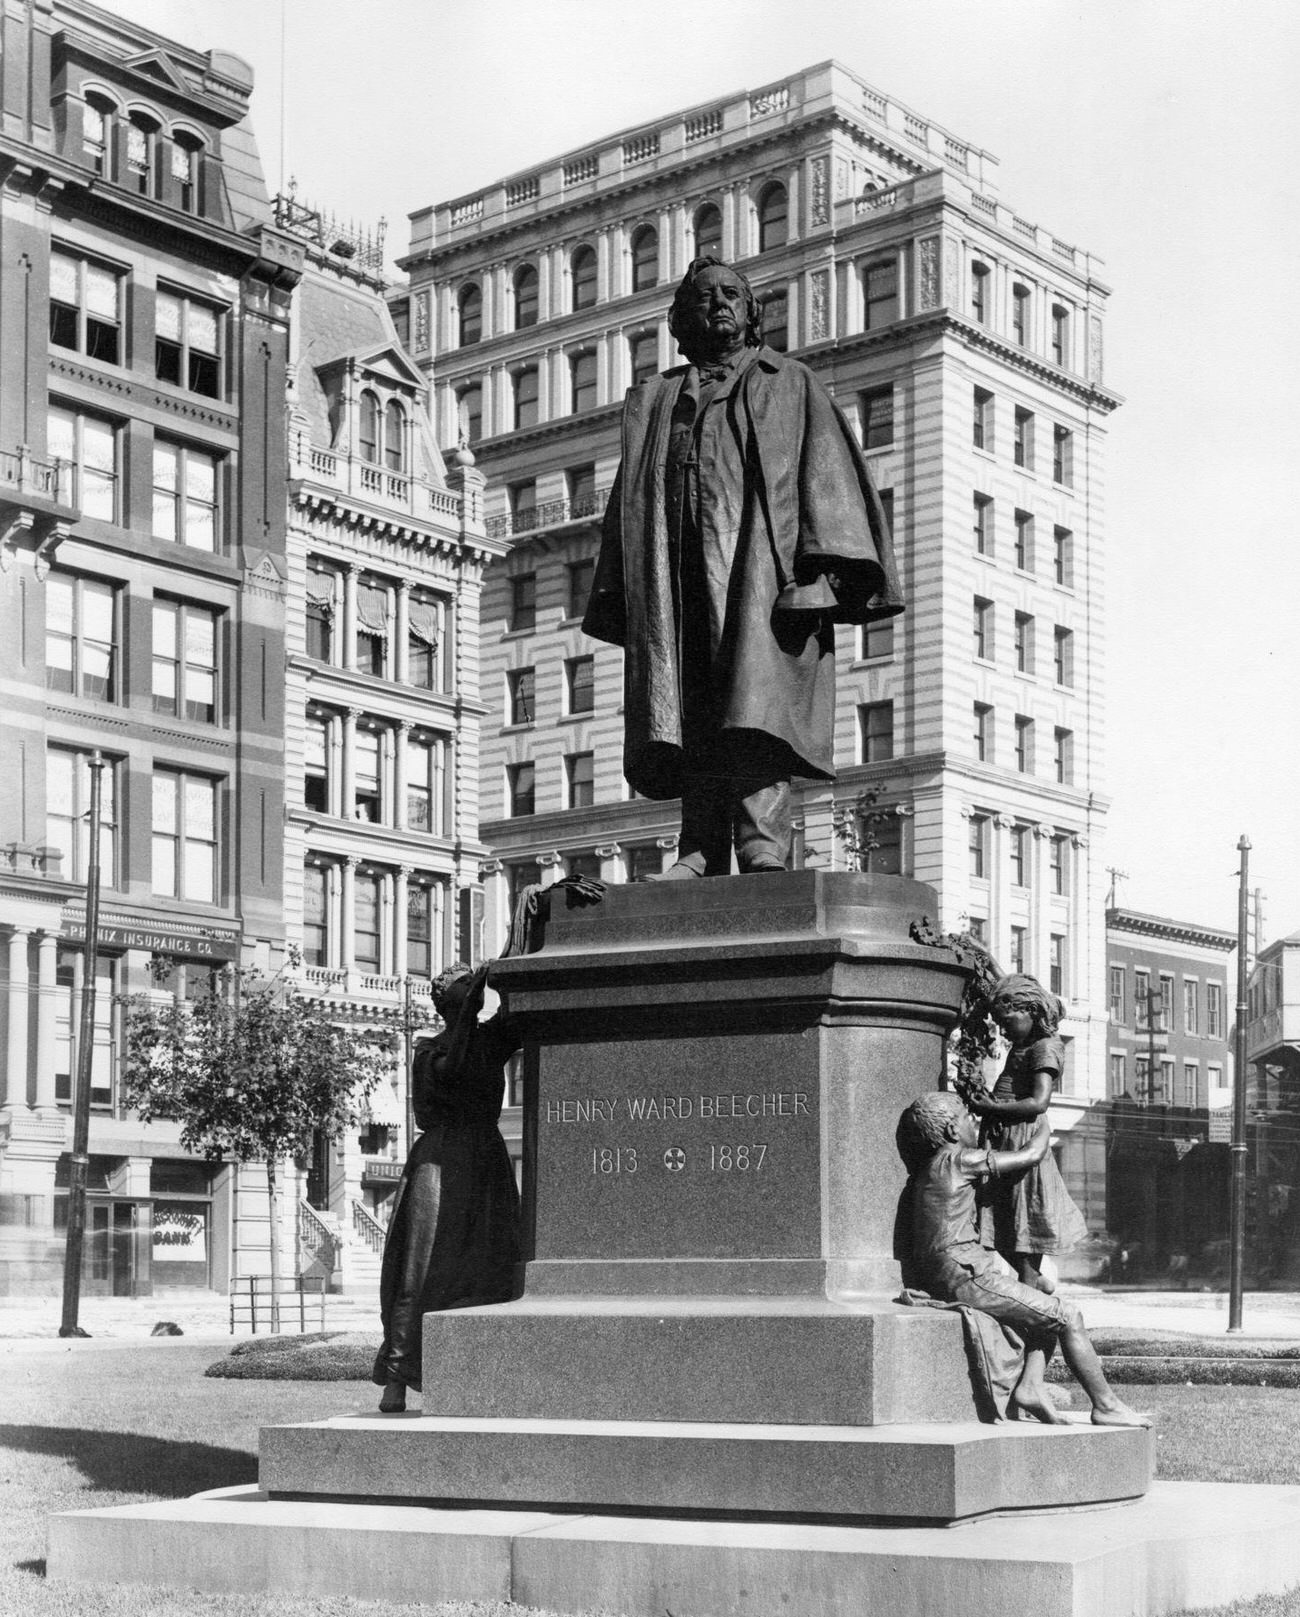 Statue Of Henry Ward Beecher At Court, Fulton, And Washington Streets, Brooklyn, 1895